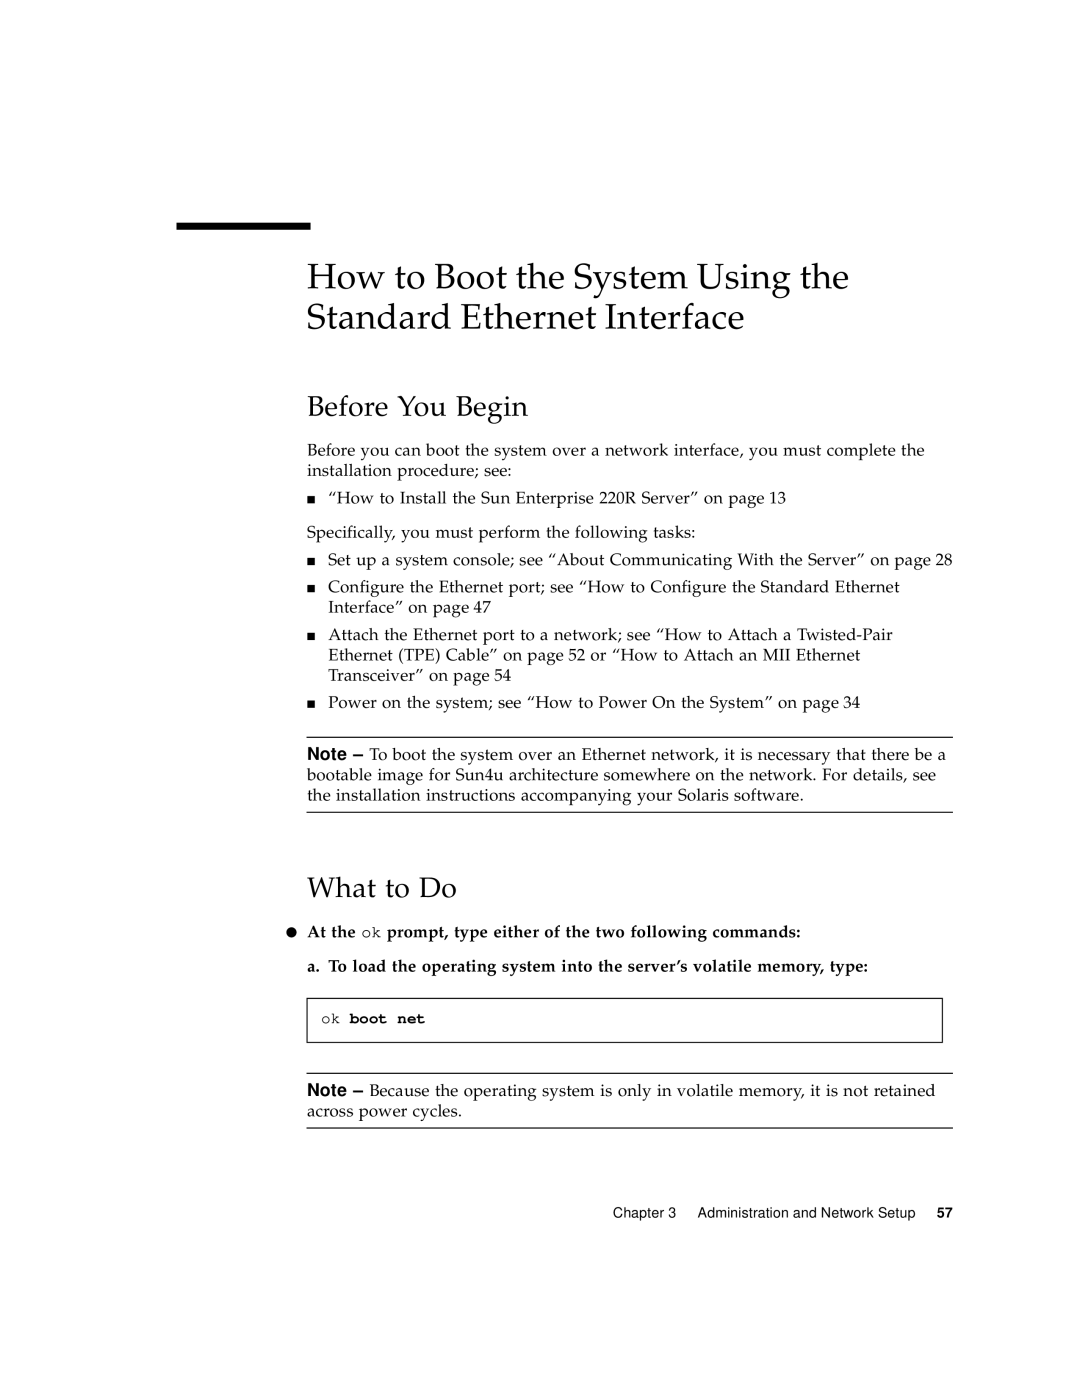 Sun Microsystems 220R manual How to Boot the System Using the Standard Ethernet Interface, Before You Begin, What to Do 